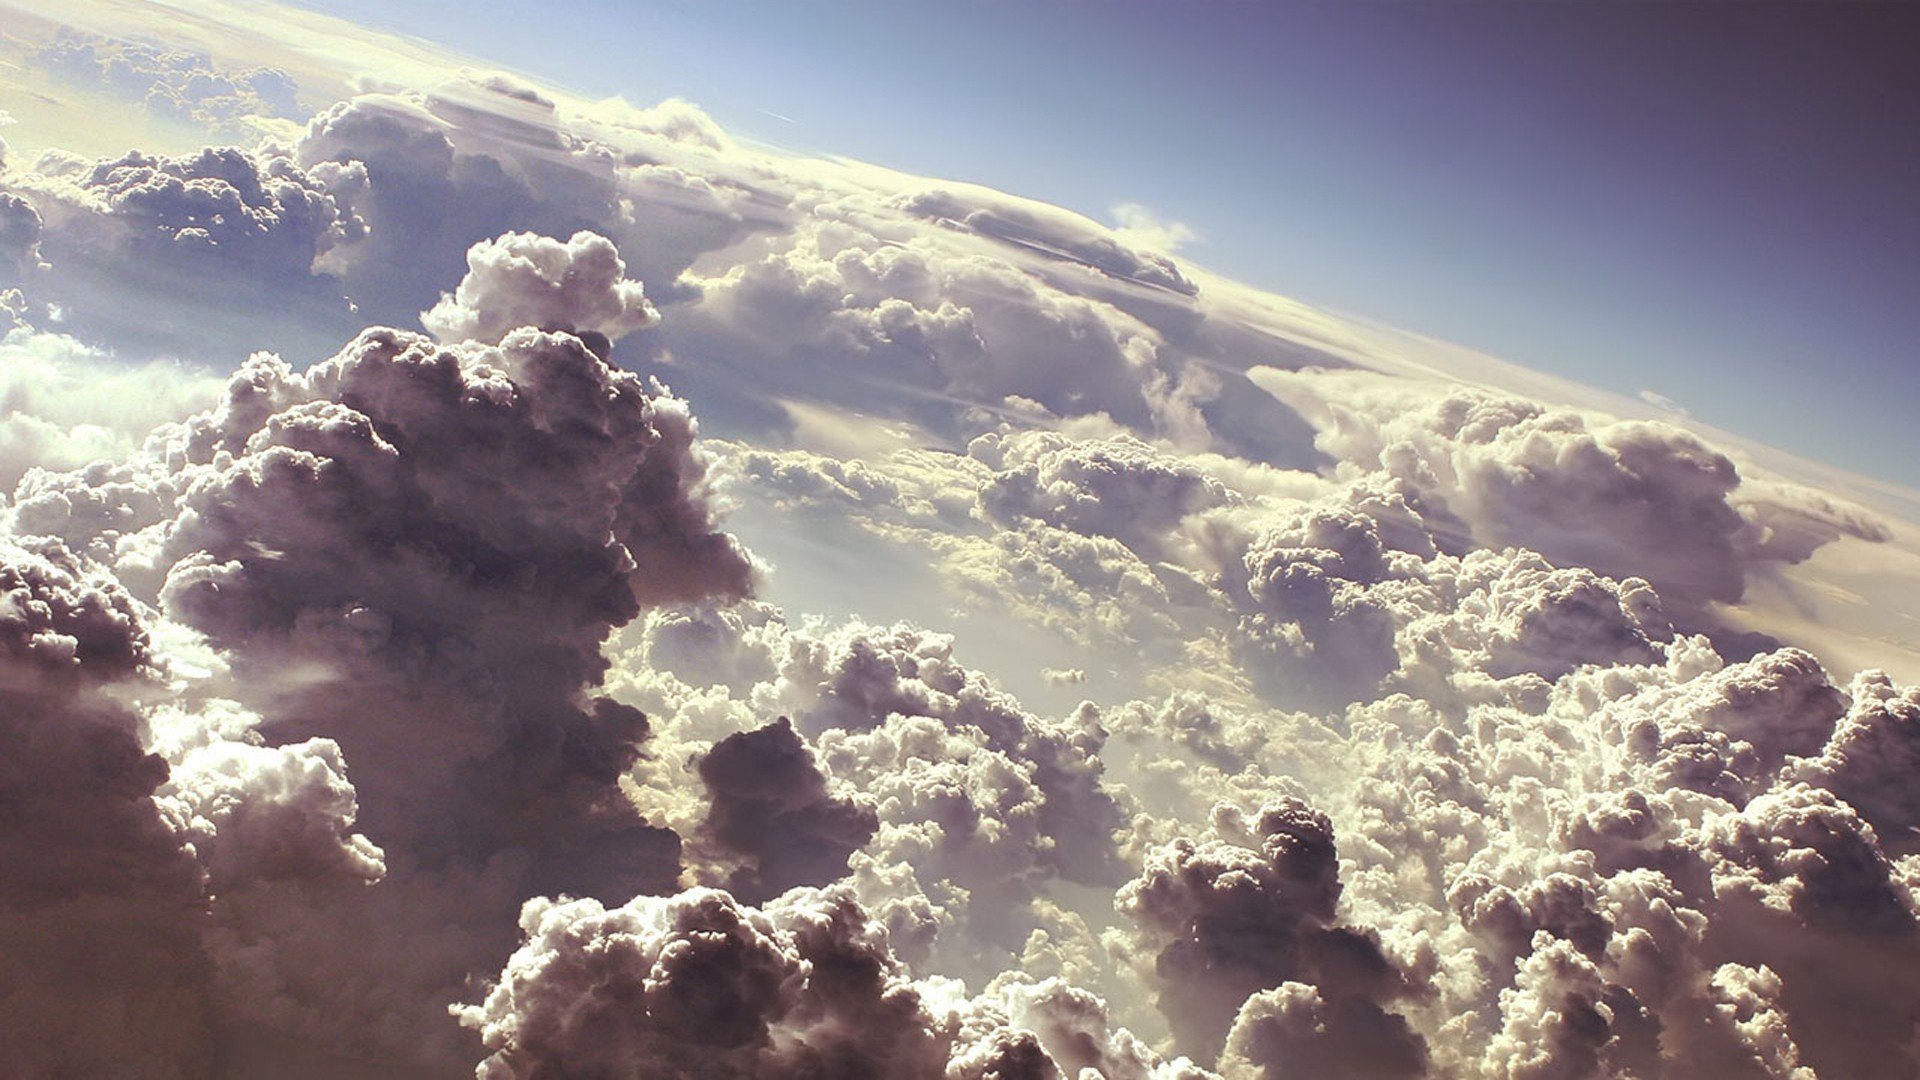 Download Cloud Background Images HD Wallpaper of Nature 1920x1080